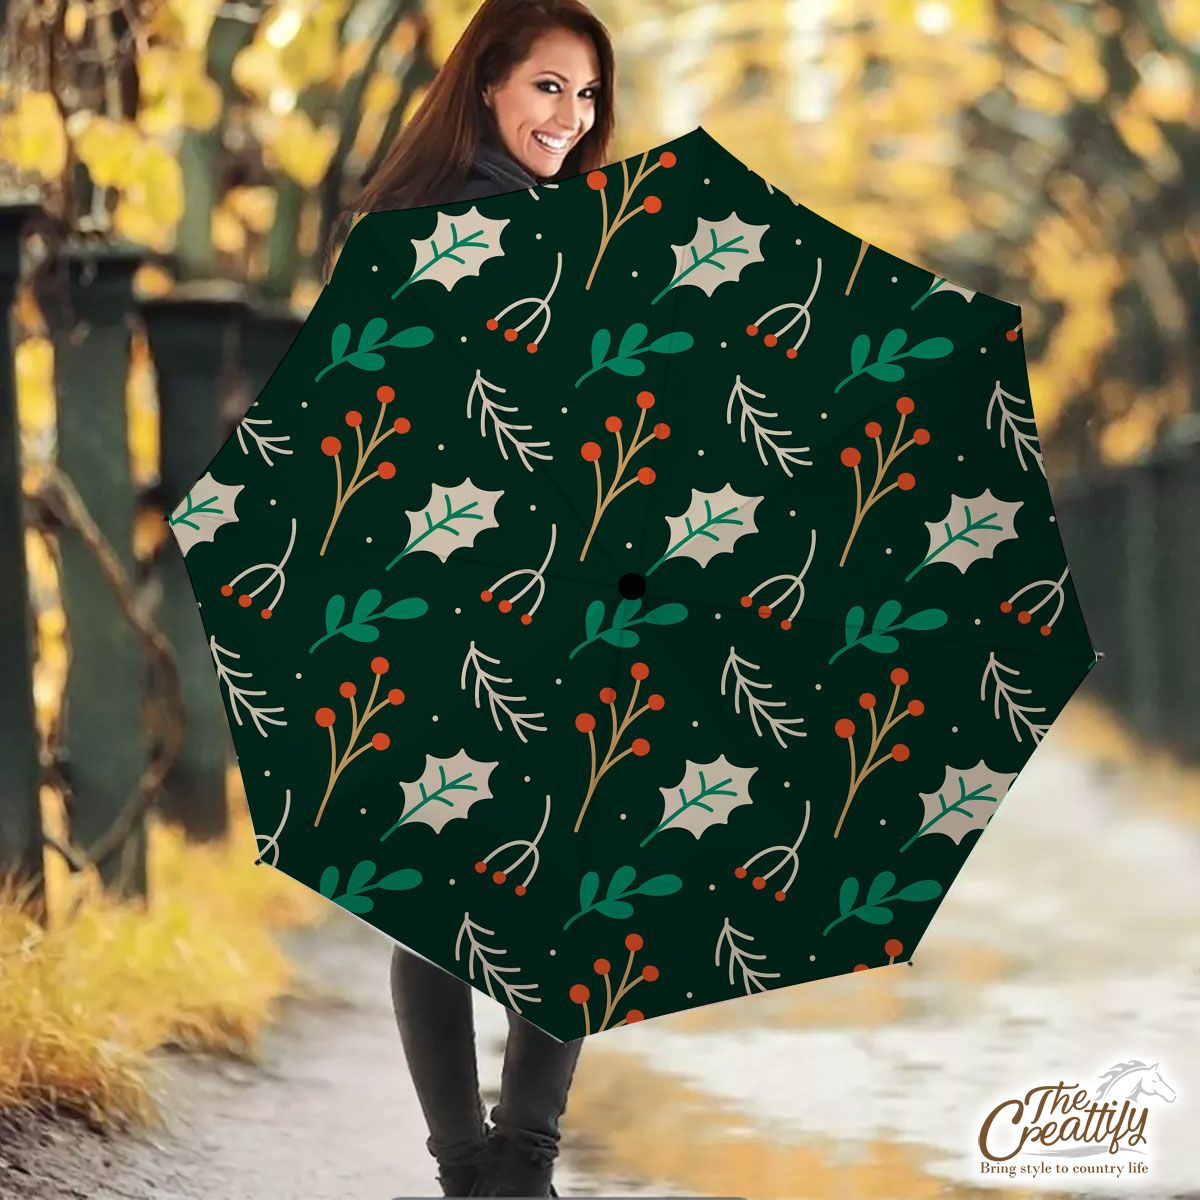 Red Berries And Holly Leaf Pattern Umbrella